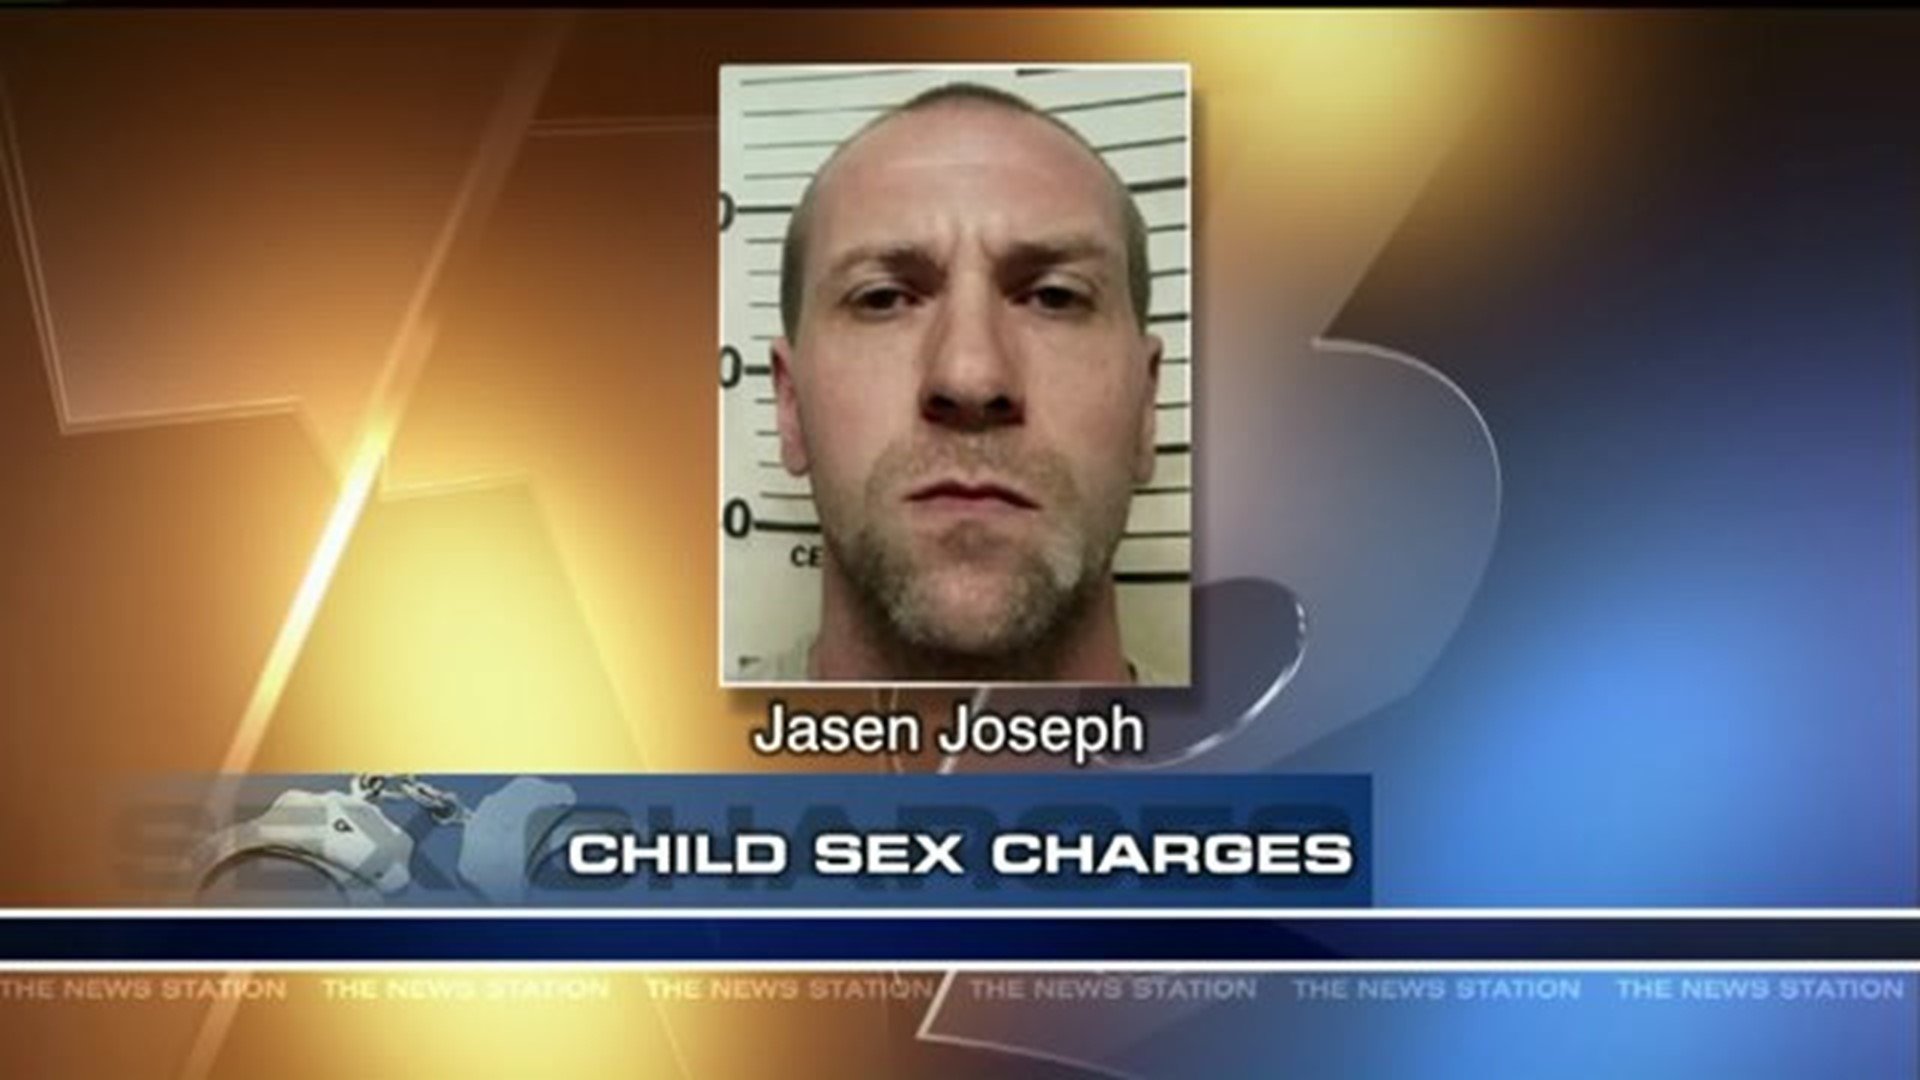 Forced To Watch - Police: Schuylkill County Man Forced Child to Watch Porn | wnep.com